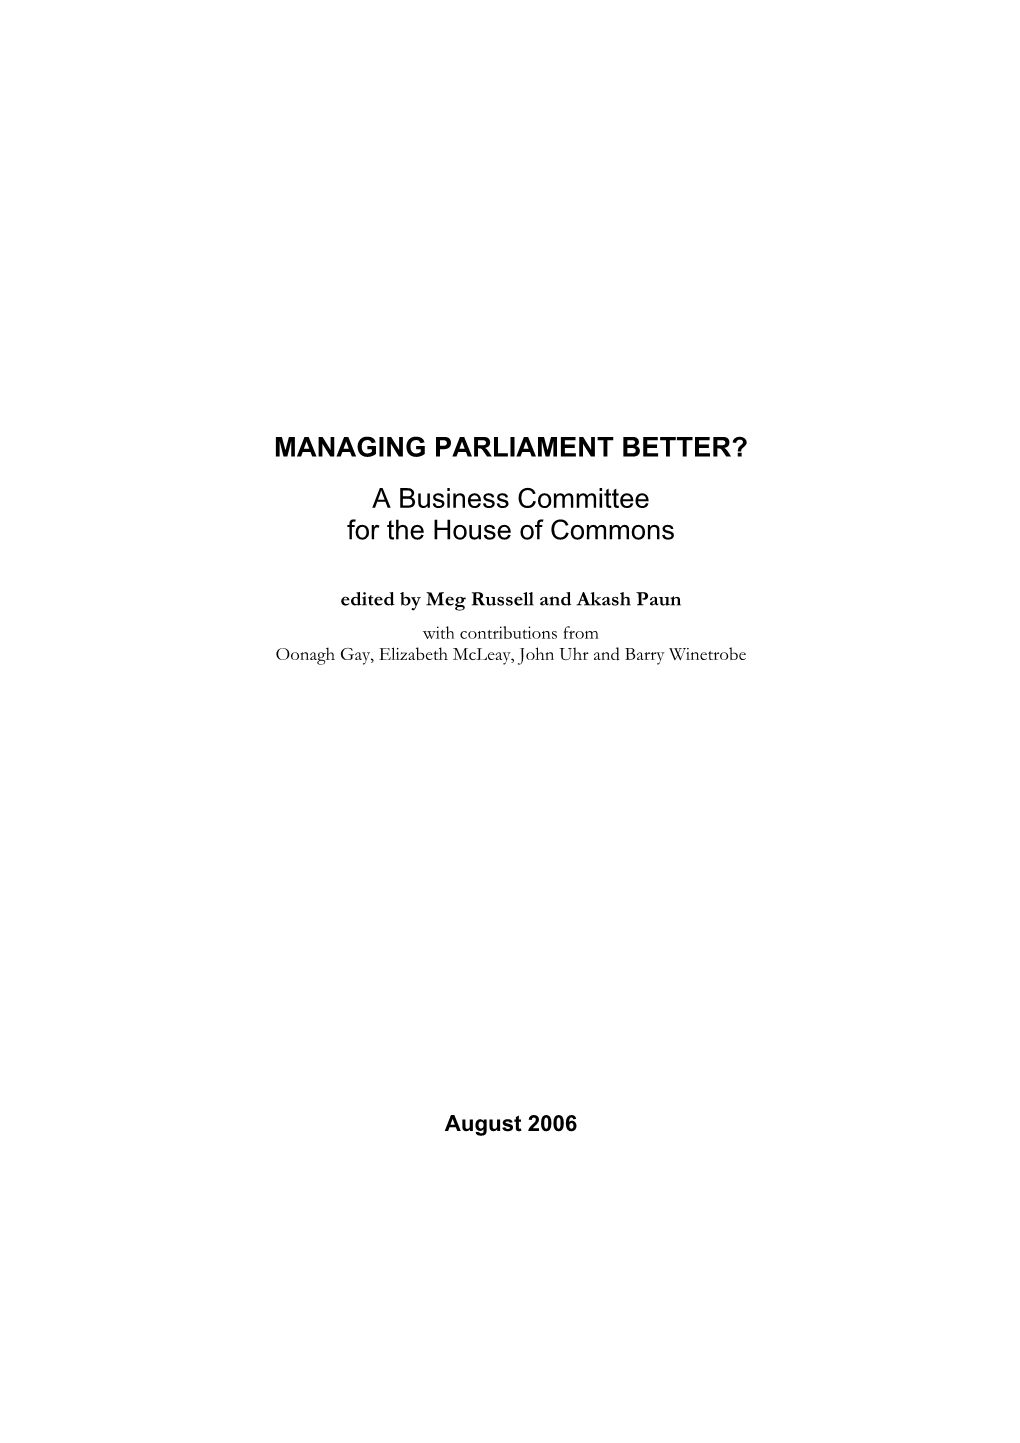 MANAGING PARLIAMENT BETTER? a Business Committee for The